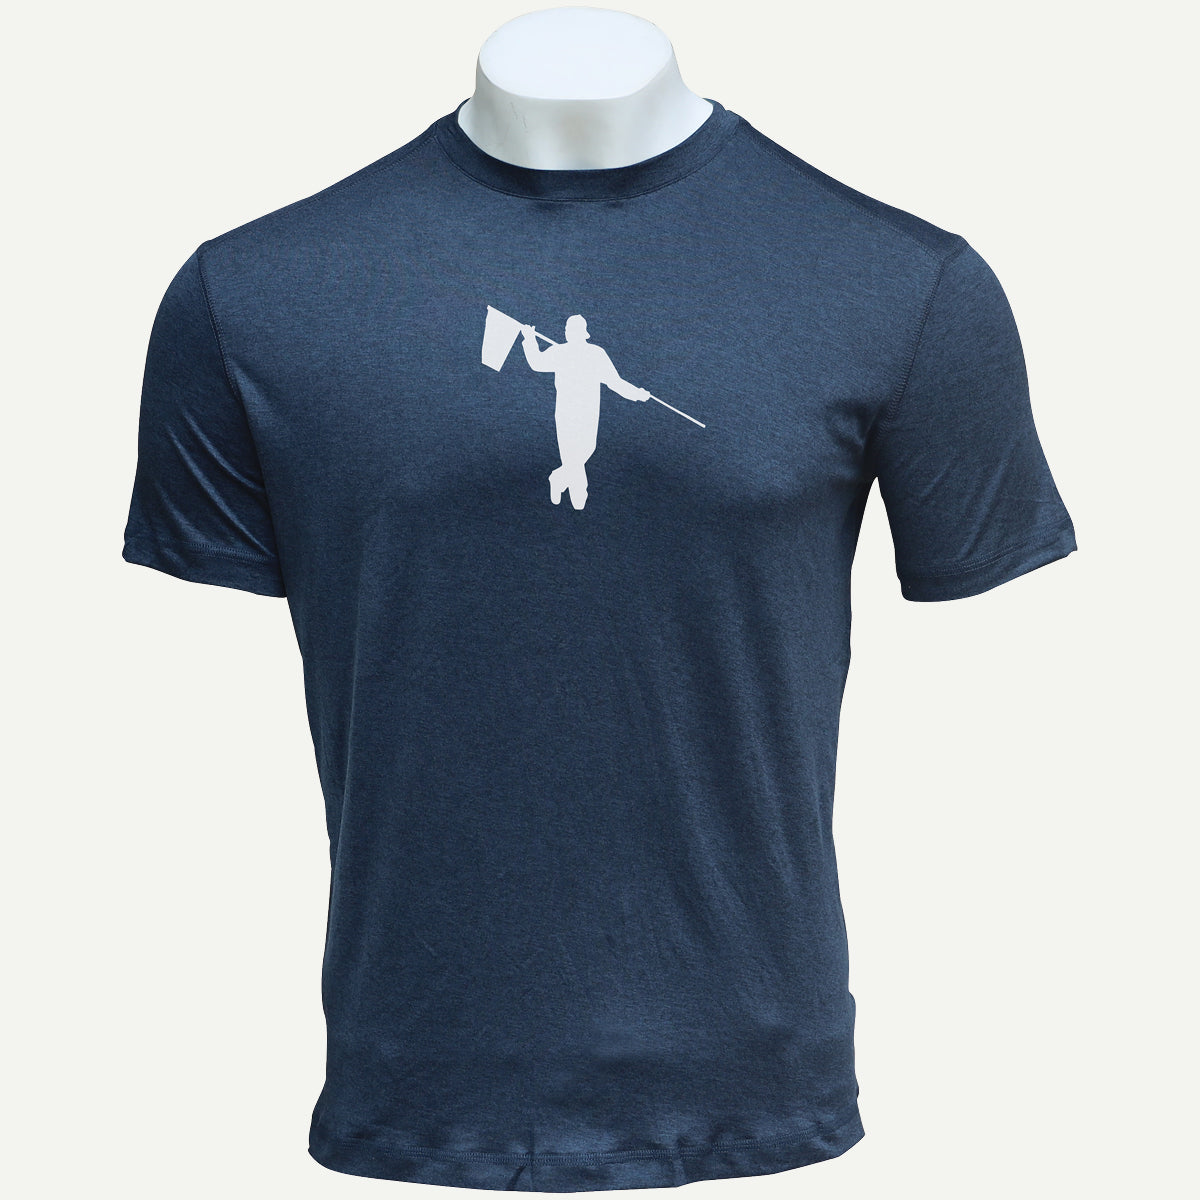 BUTTER T LOOPER SILHOUETTE - NAVY HEATHER